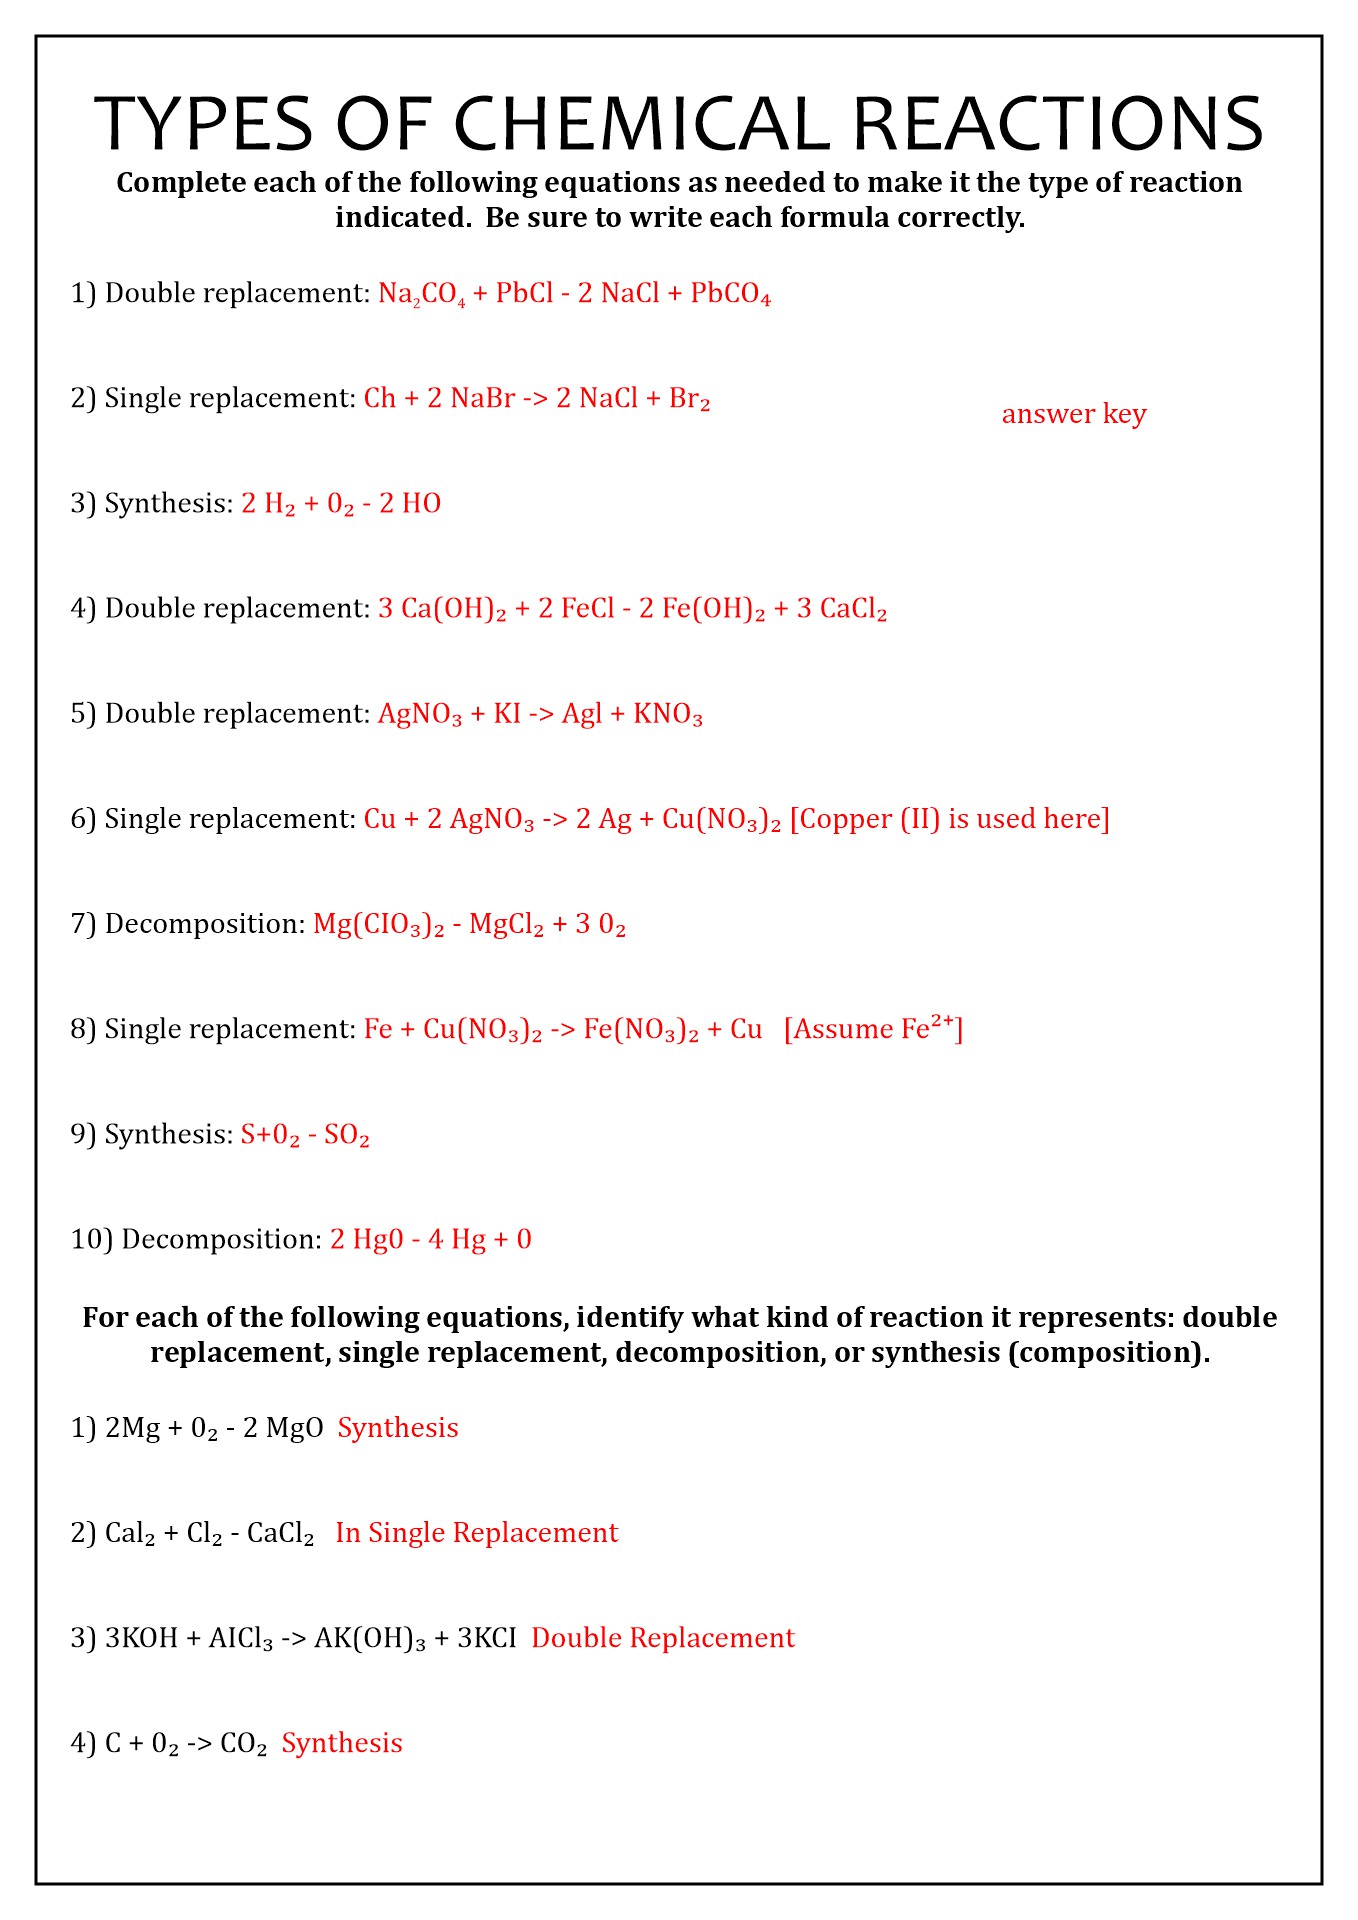 identifying-types-of-chemical-reactions-worksheets